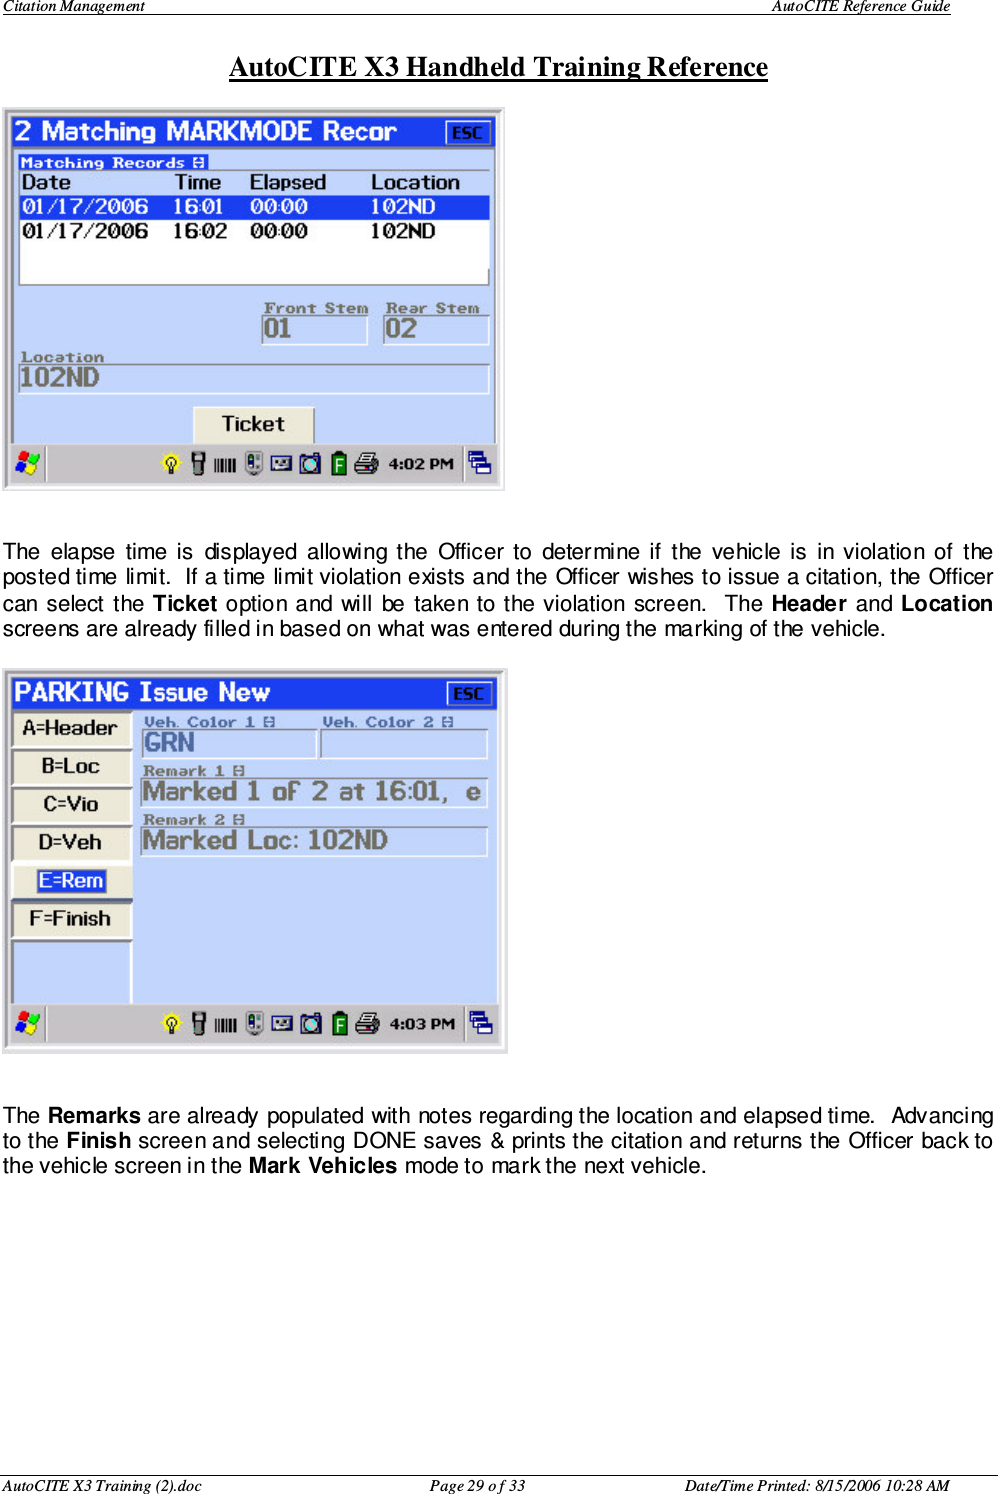 Citation Management    AutoCITE Reference Guide  AutoCITE X3 Handheld Training Reference AutoCITE X3 Training (2).doc  Page 29 o f 33  Date/Time Printed: 8/15/2006 10:28 AM   The  elapse  time  is  displayed  allowing  the  Officer  to  determine  if  the  vehicle  is  in  violation  of  the posted time limit.  If a time limit violation exists and the Officer wishes to issue a citation, the Officer can select the Ticket option  and will  be taken to the violation screen.   The  Header  and Location screens are already filled in based on what was entered during the marking of the vehicle.     The Remarks are already populated with notes regarding the location and elapsed time.  Advancing to the Finish screen and selecting DONE saves &amp; prints the citation and returns the Officer back to the vehicle screen in the Mark Vehicles mode to mark the next vehicle.  